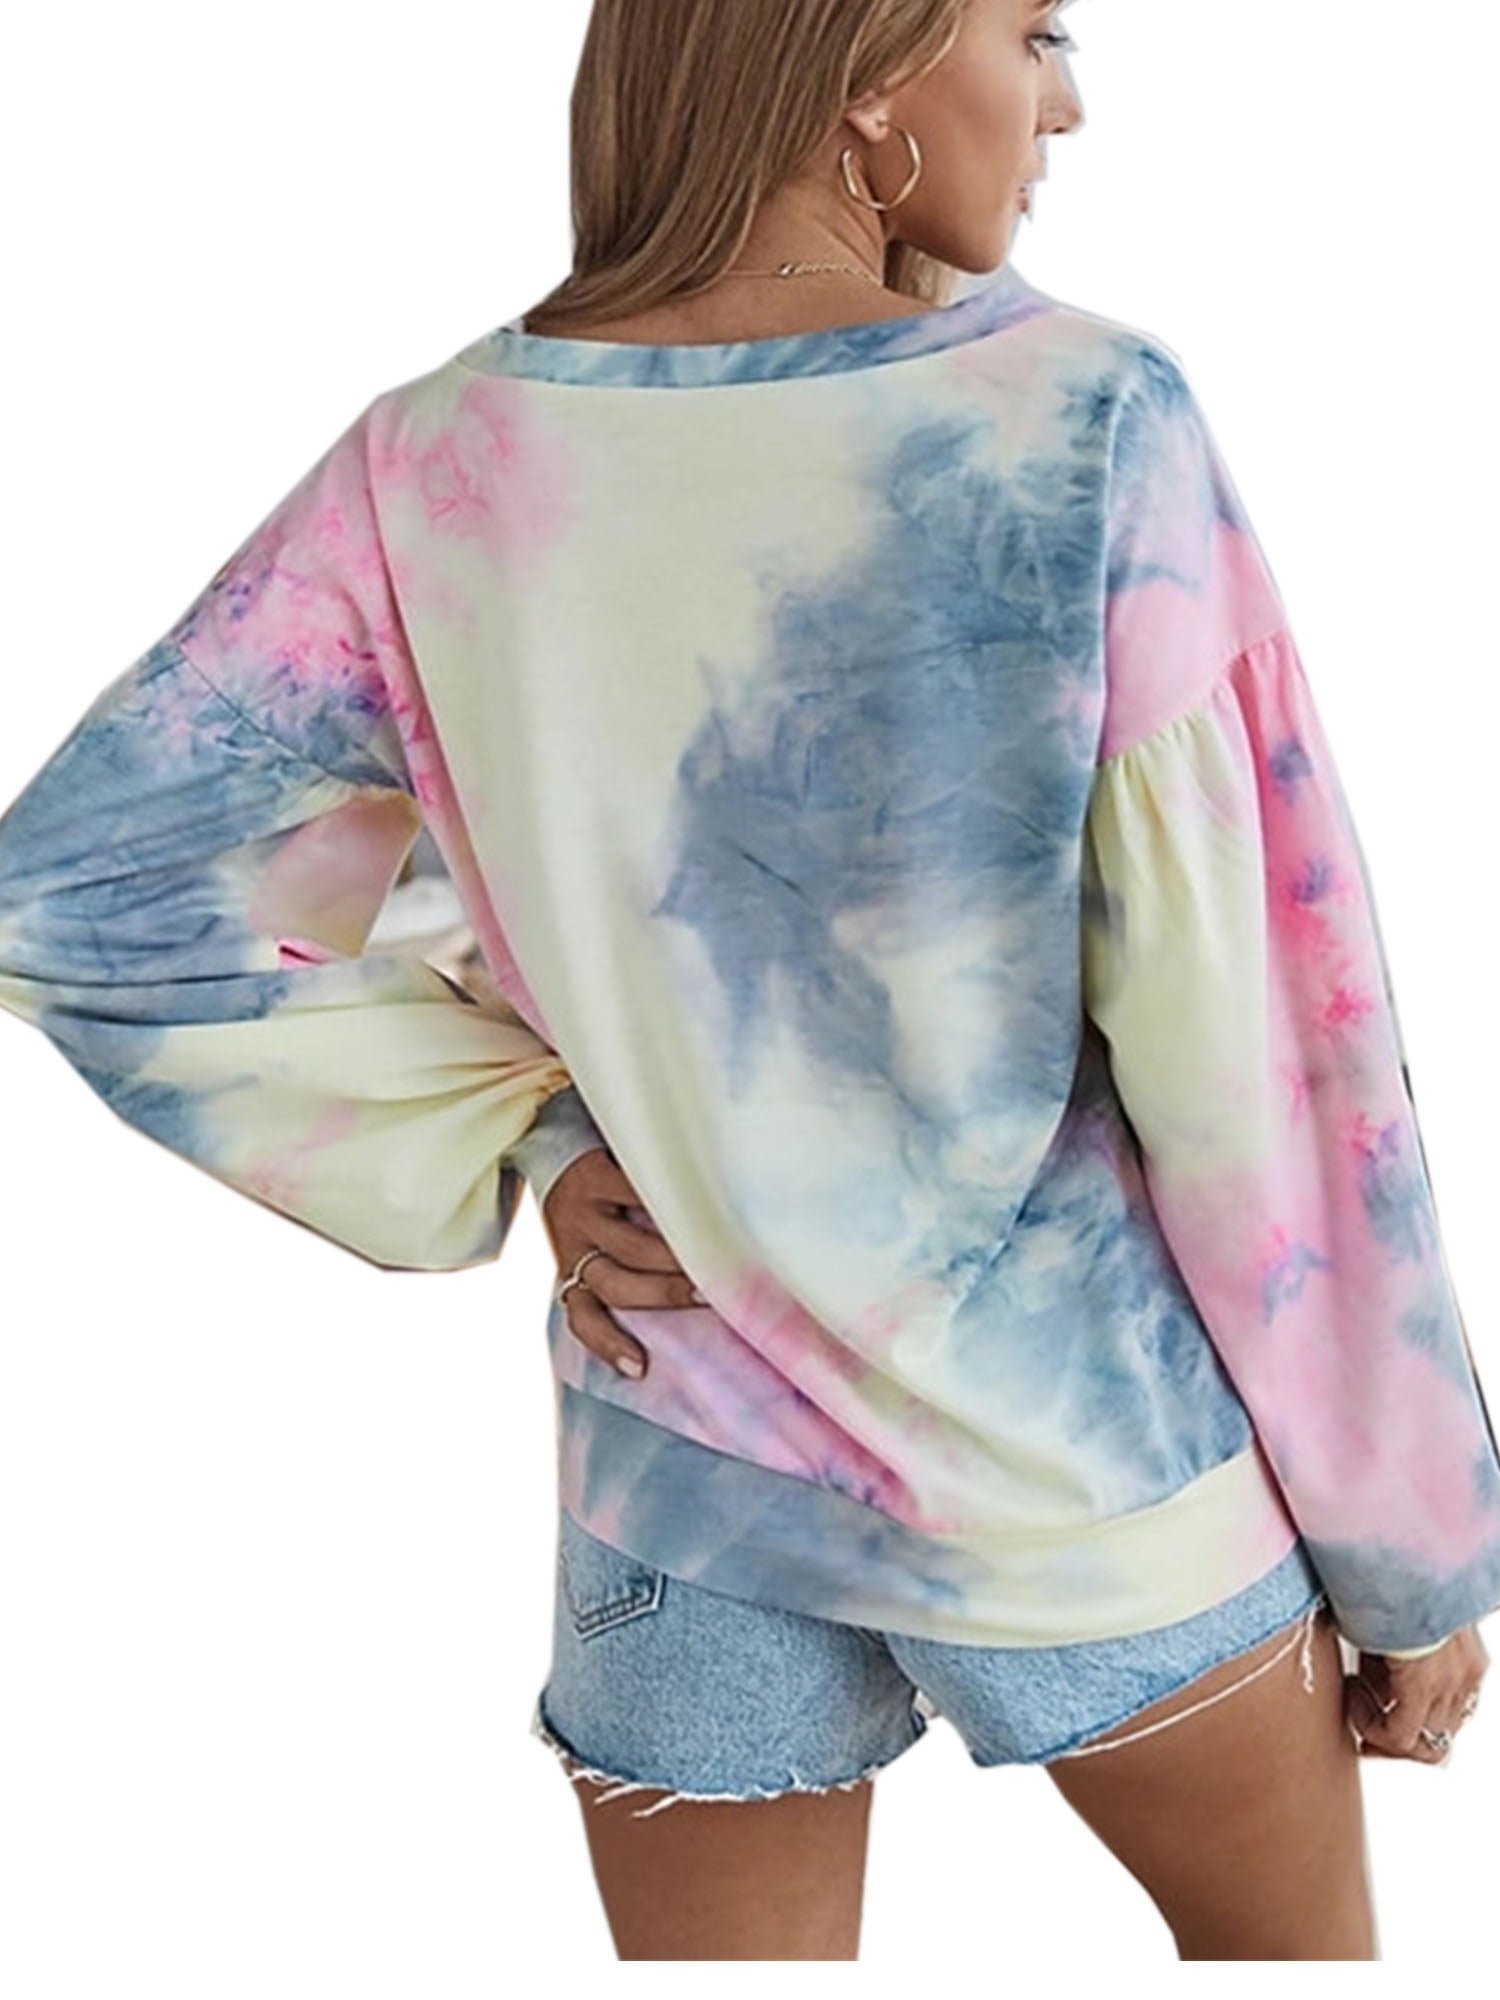 Lazapa Pullover Blouse for Women Round Neck Long-Sleeve Gradient Tie Dye Sweatshirt Tops Loose Casual Shirt Outwear